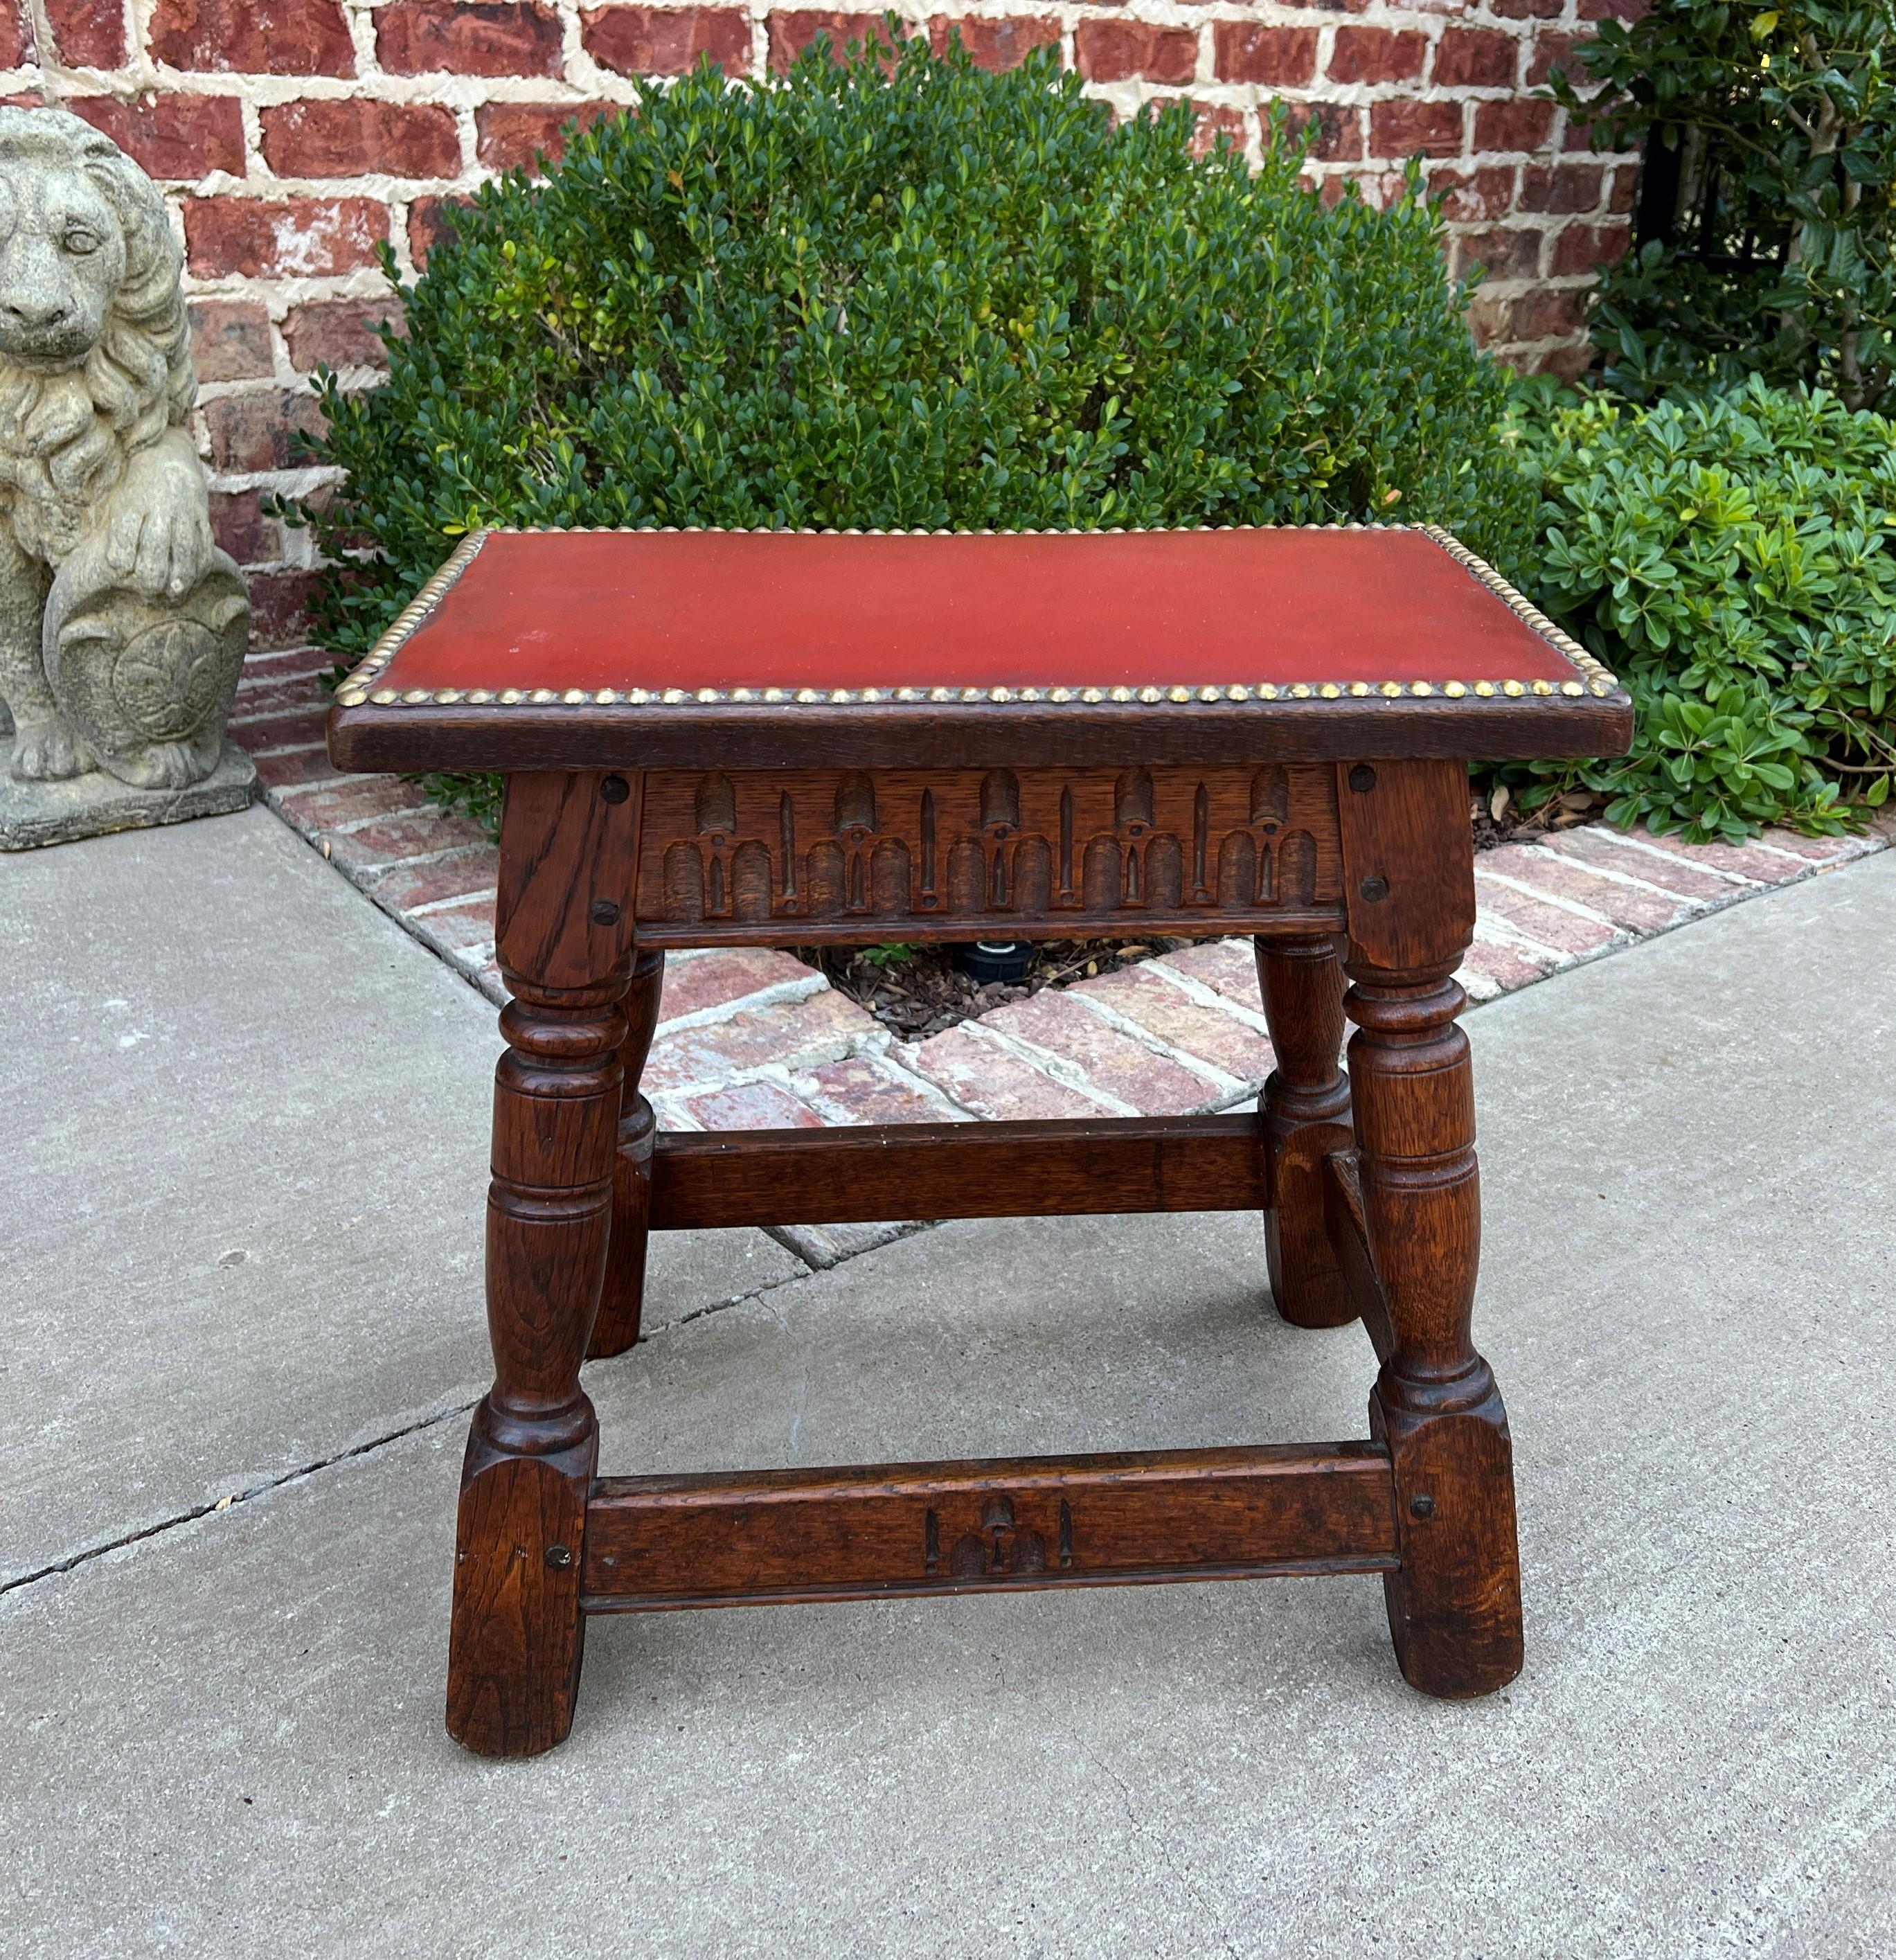 Charming antique English oak joint stool, footstool, or small bench with red leather top~~late 19th century

Classic British flair carved oak decorator piece with red leather top and brass tacks~~highly carved skirt and splayed legs~~old pegged